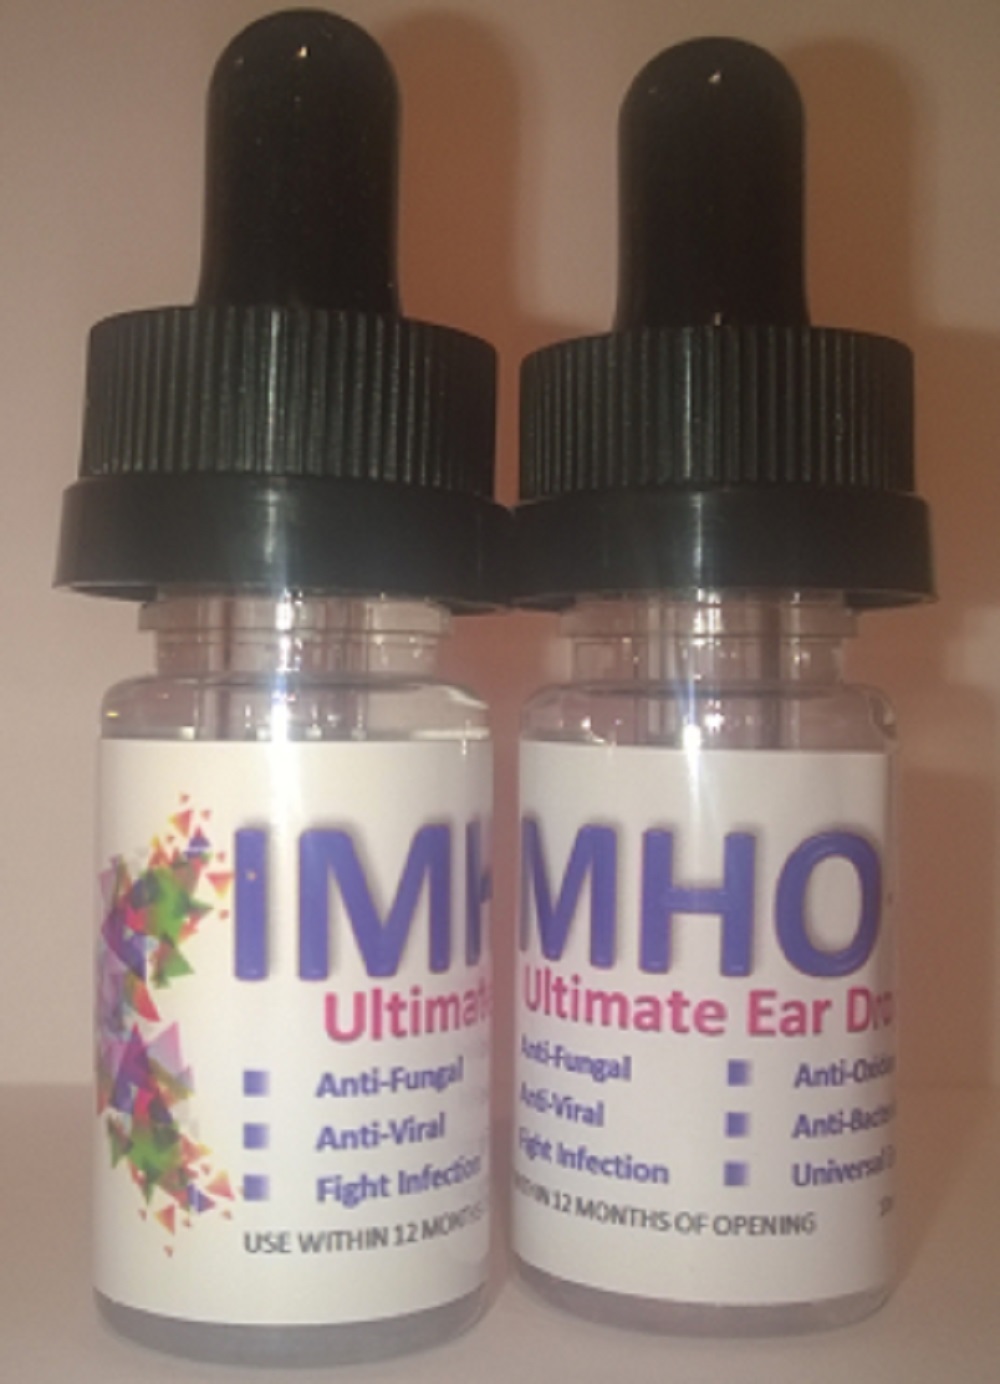 Natural "antibiotic" ear drops to treat any infection. For people